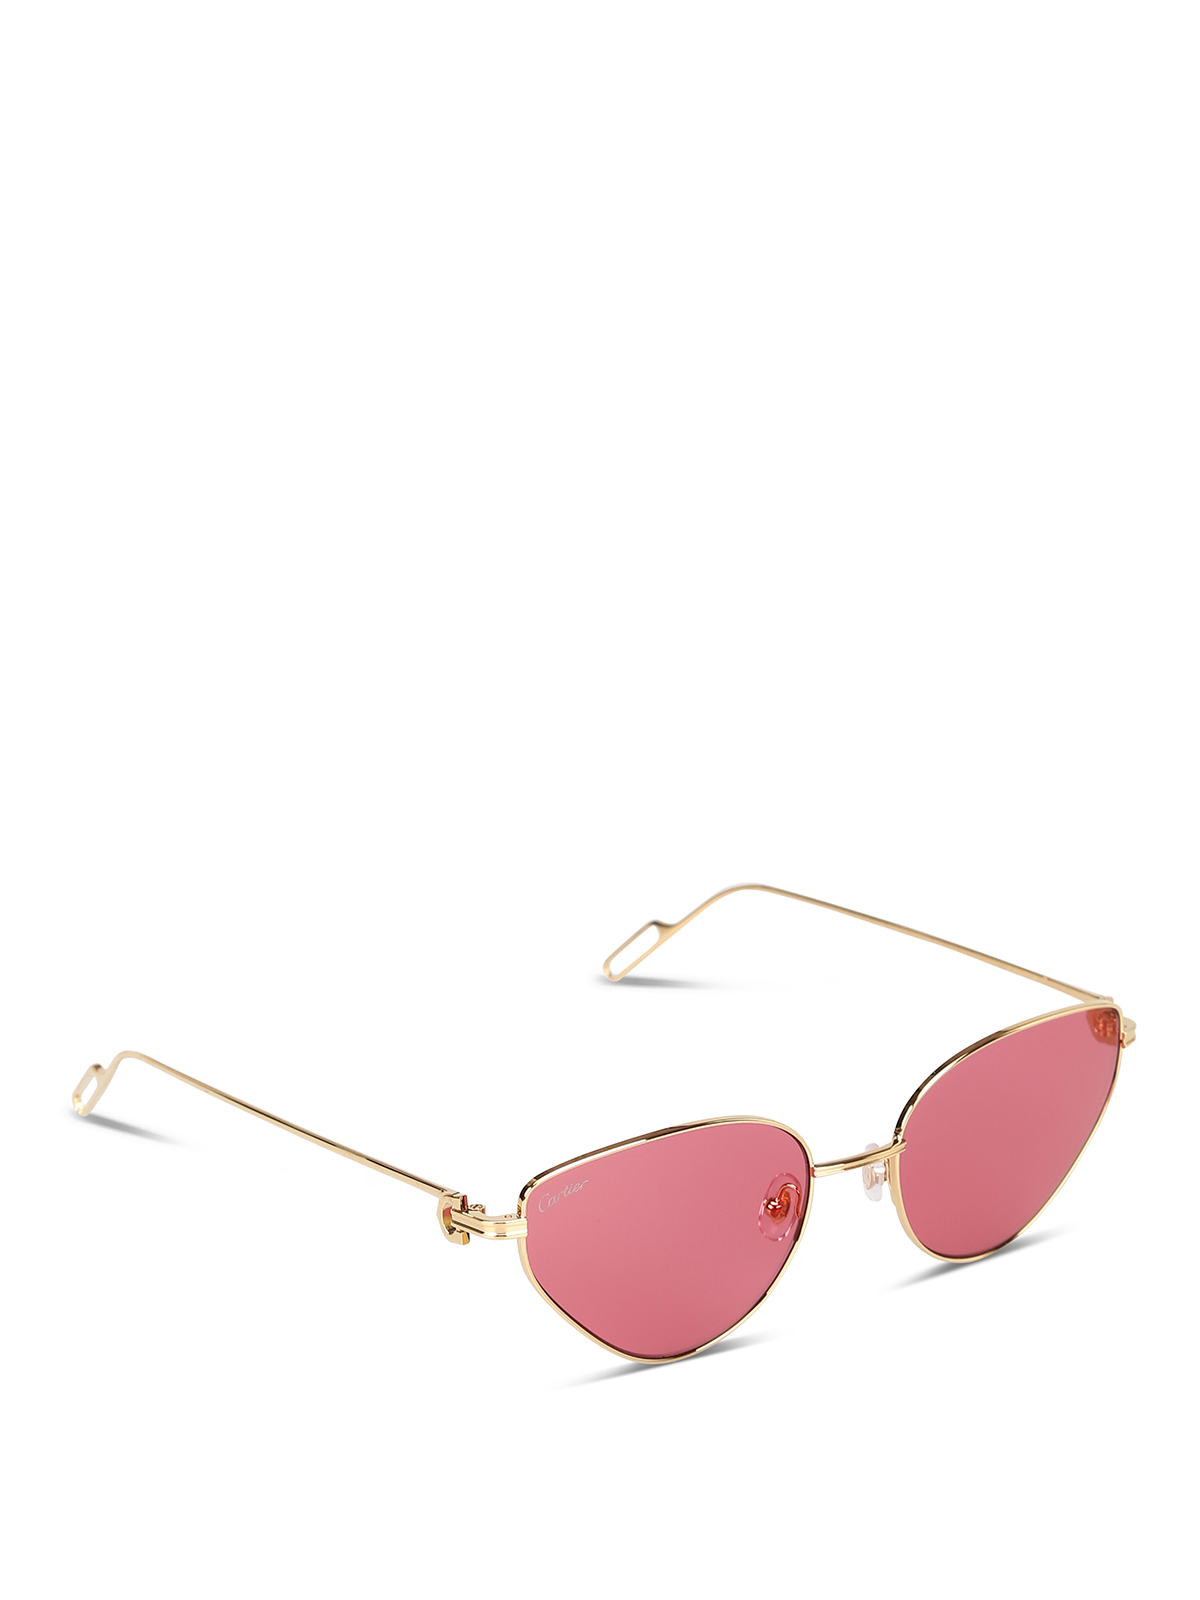 CARTIER GOLD-TONE SUNGLASSES WITH PINK LENSES